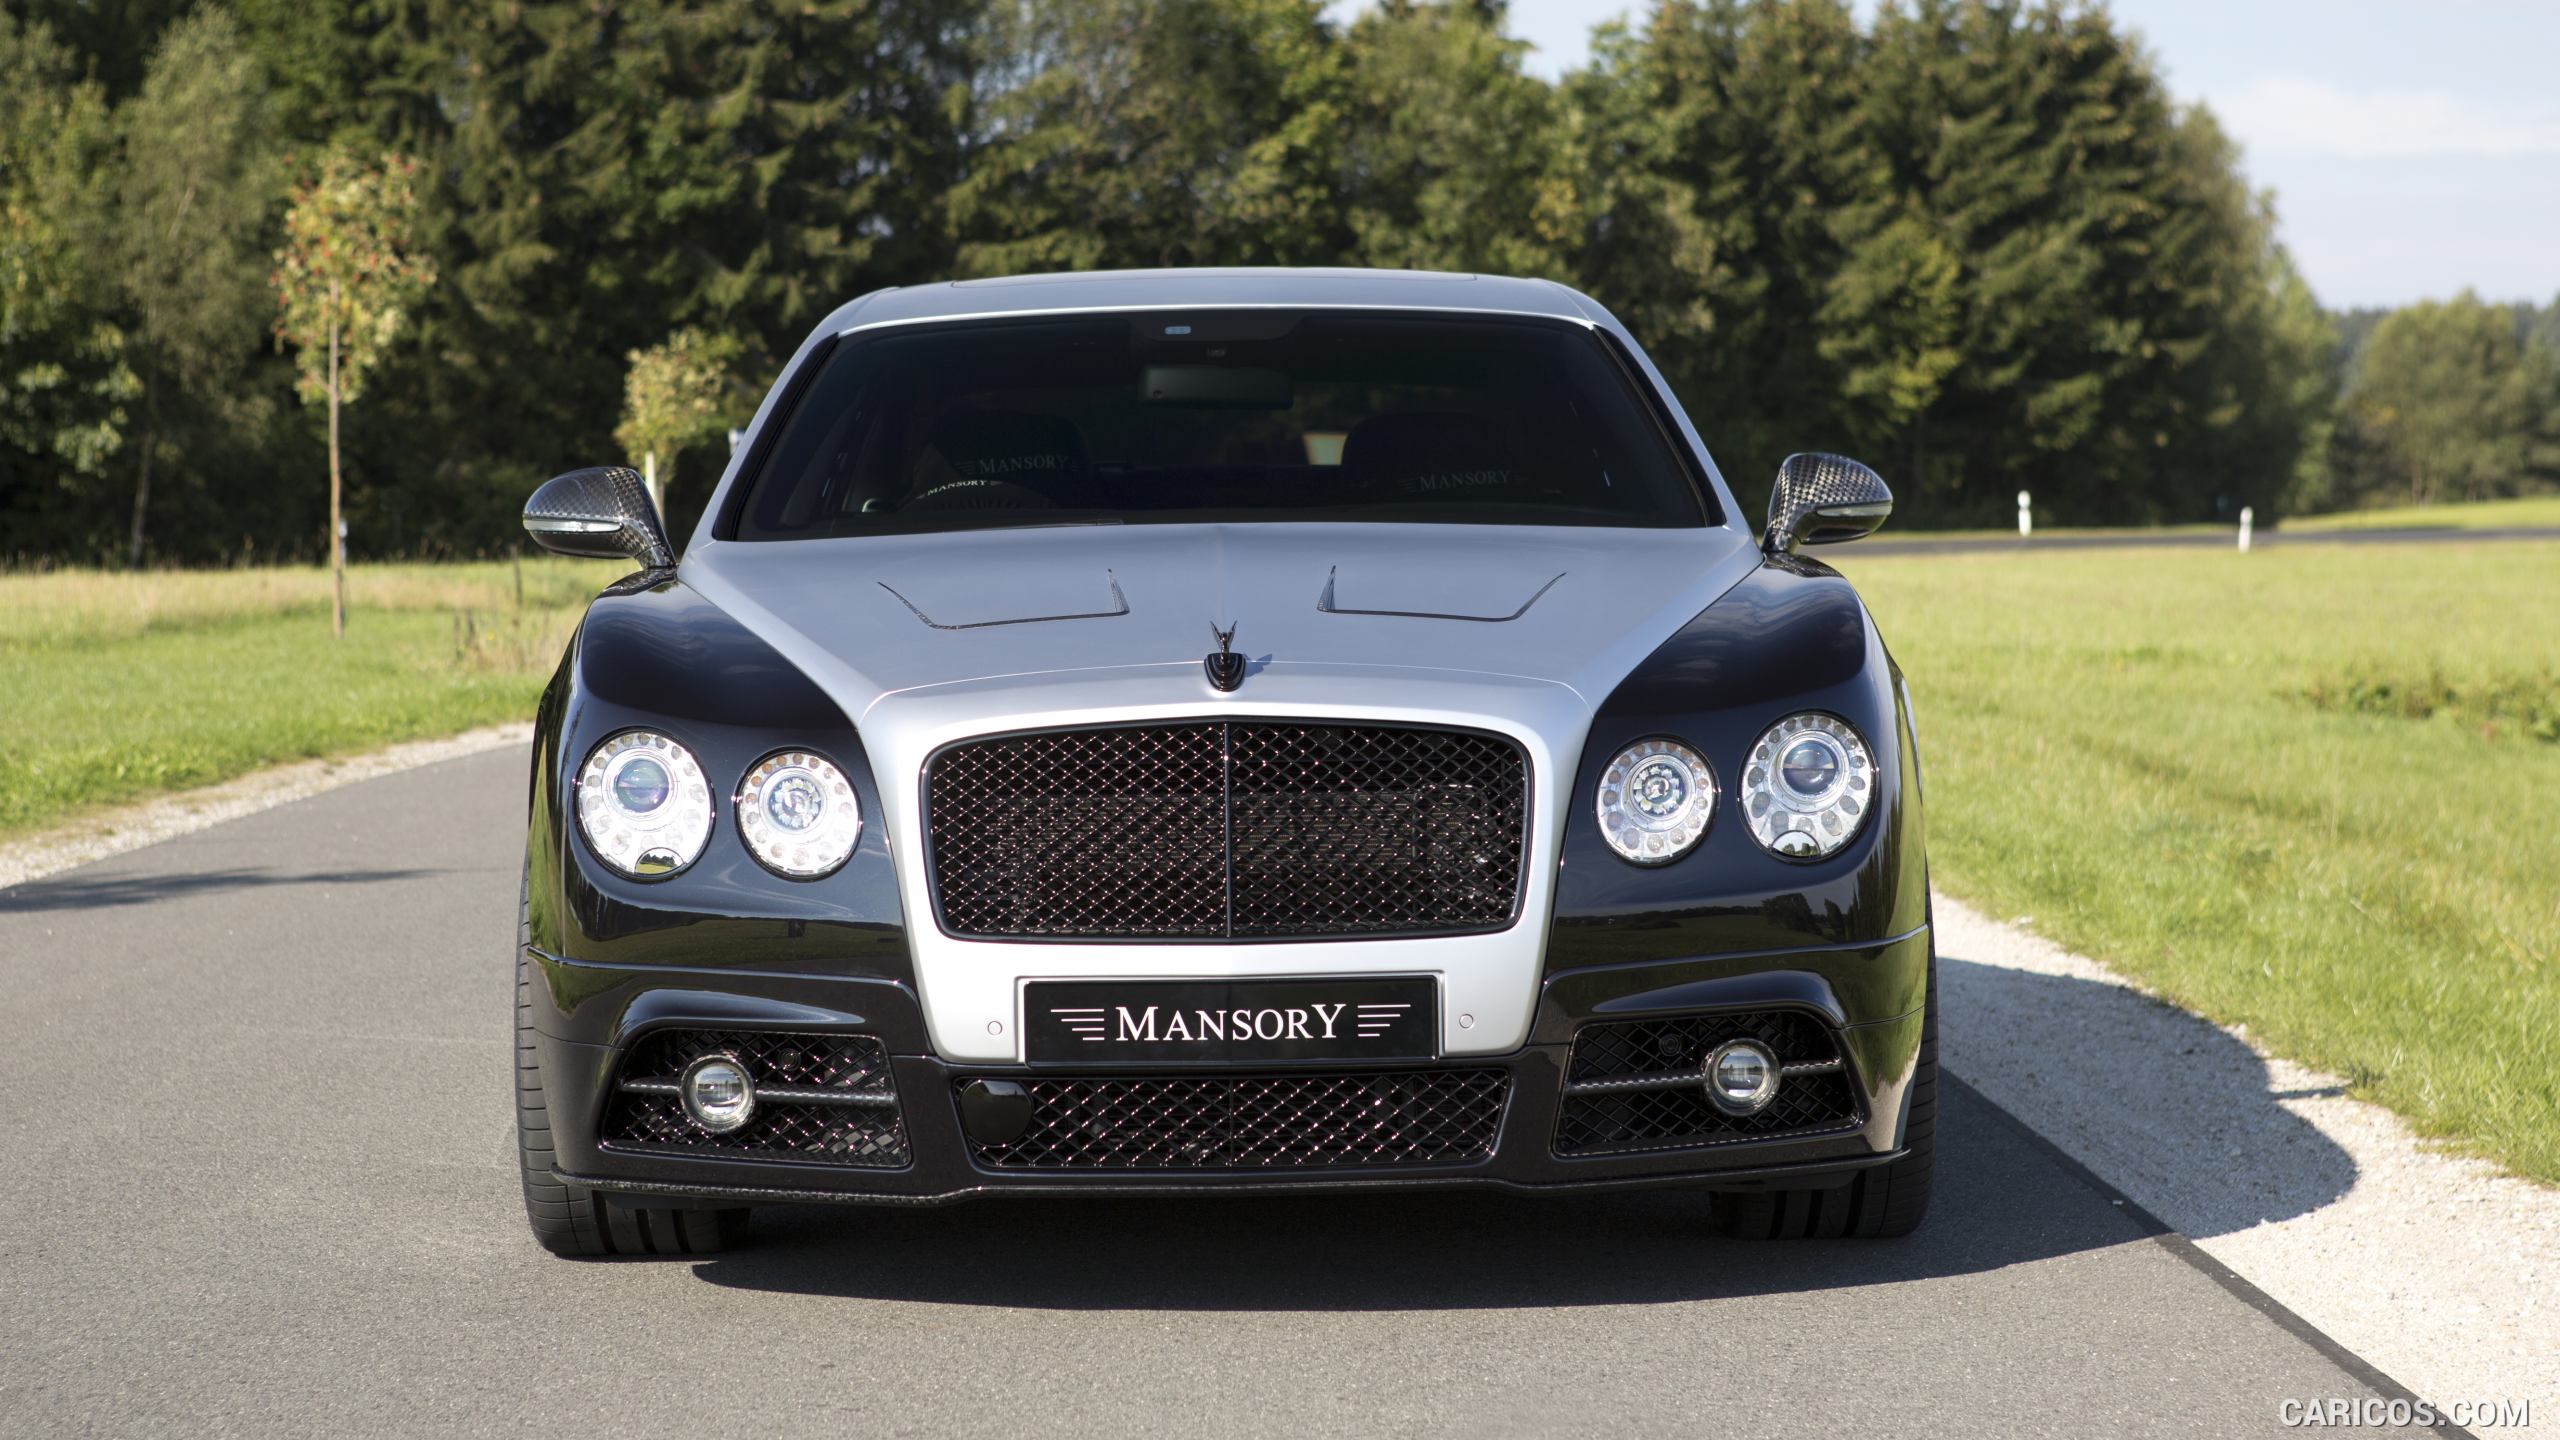 2015 MANSORY Bentley Flying Spur - Front, #4 of 9